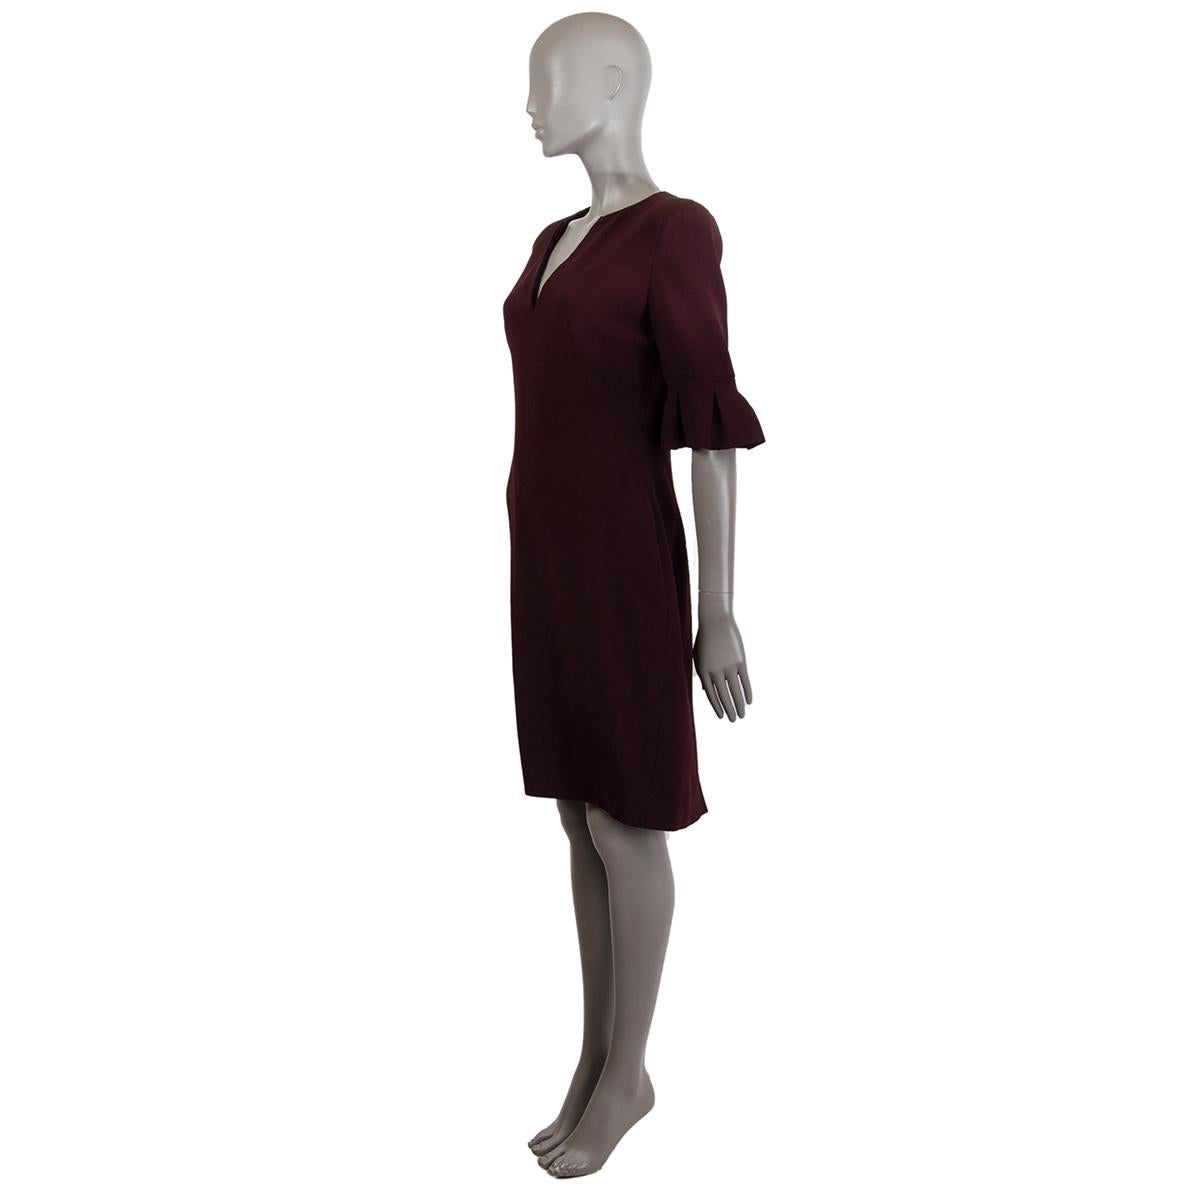 Alexander McQueen short-sleeve knee-length sheath v-neck dress in burgundy acetate (50%) and rayon (50%). Lined in acetate (74%) and silk (26%). Dress features padded shoulders and pleaded detail at sleeve. Opens with a zipper on the back. Has been